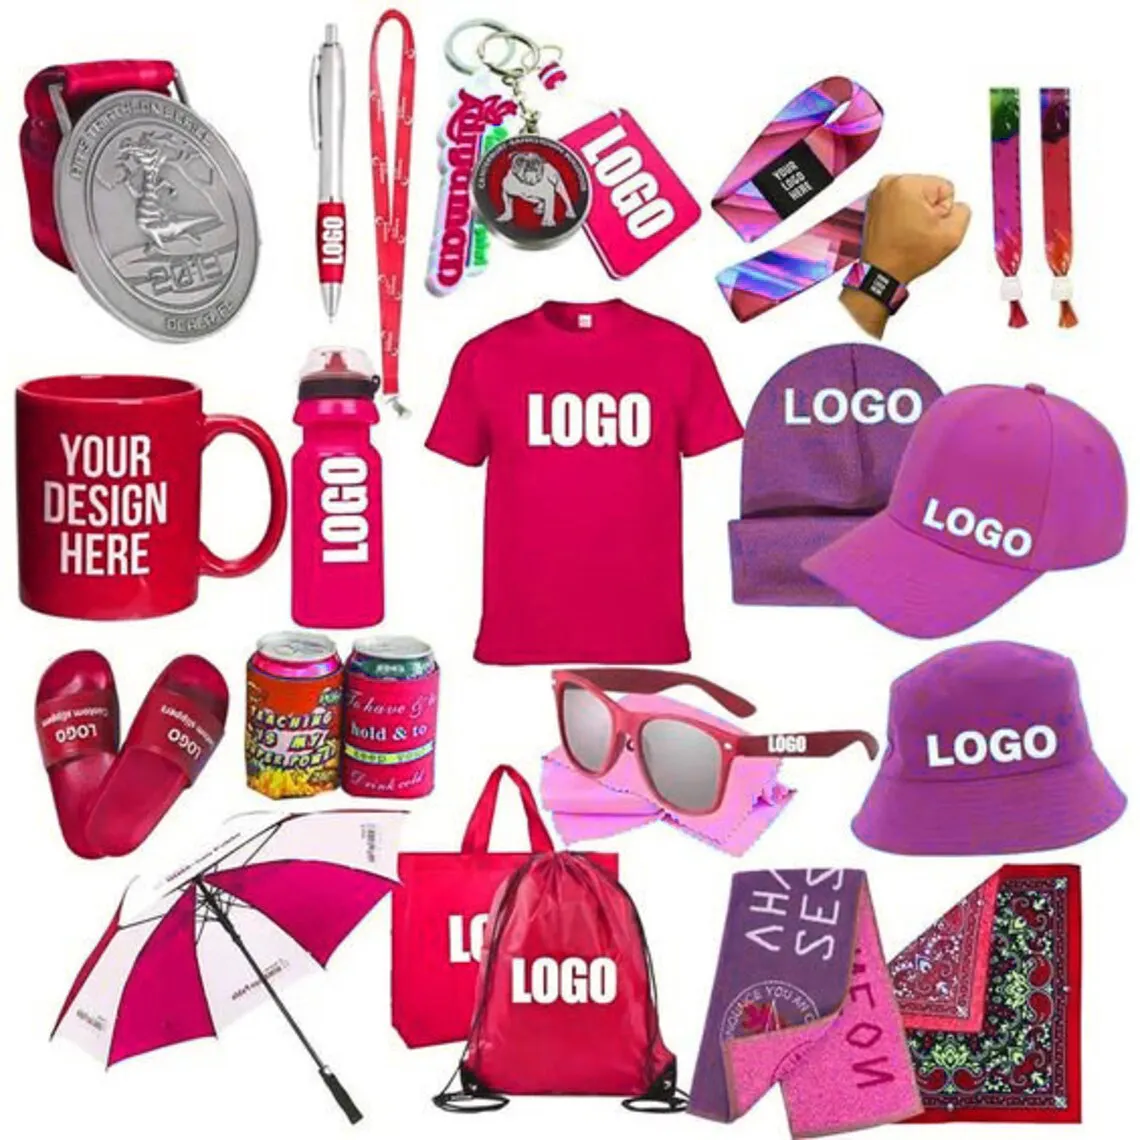 Customized Advertising Welcome Gifts Set Novelty Business Giveaways Marketing Promotional Gifts Items With Logo